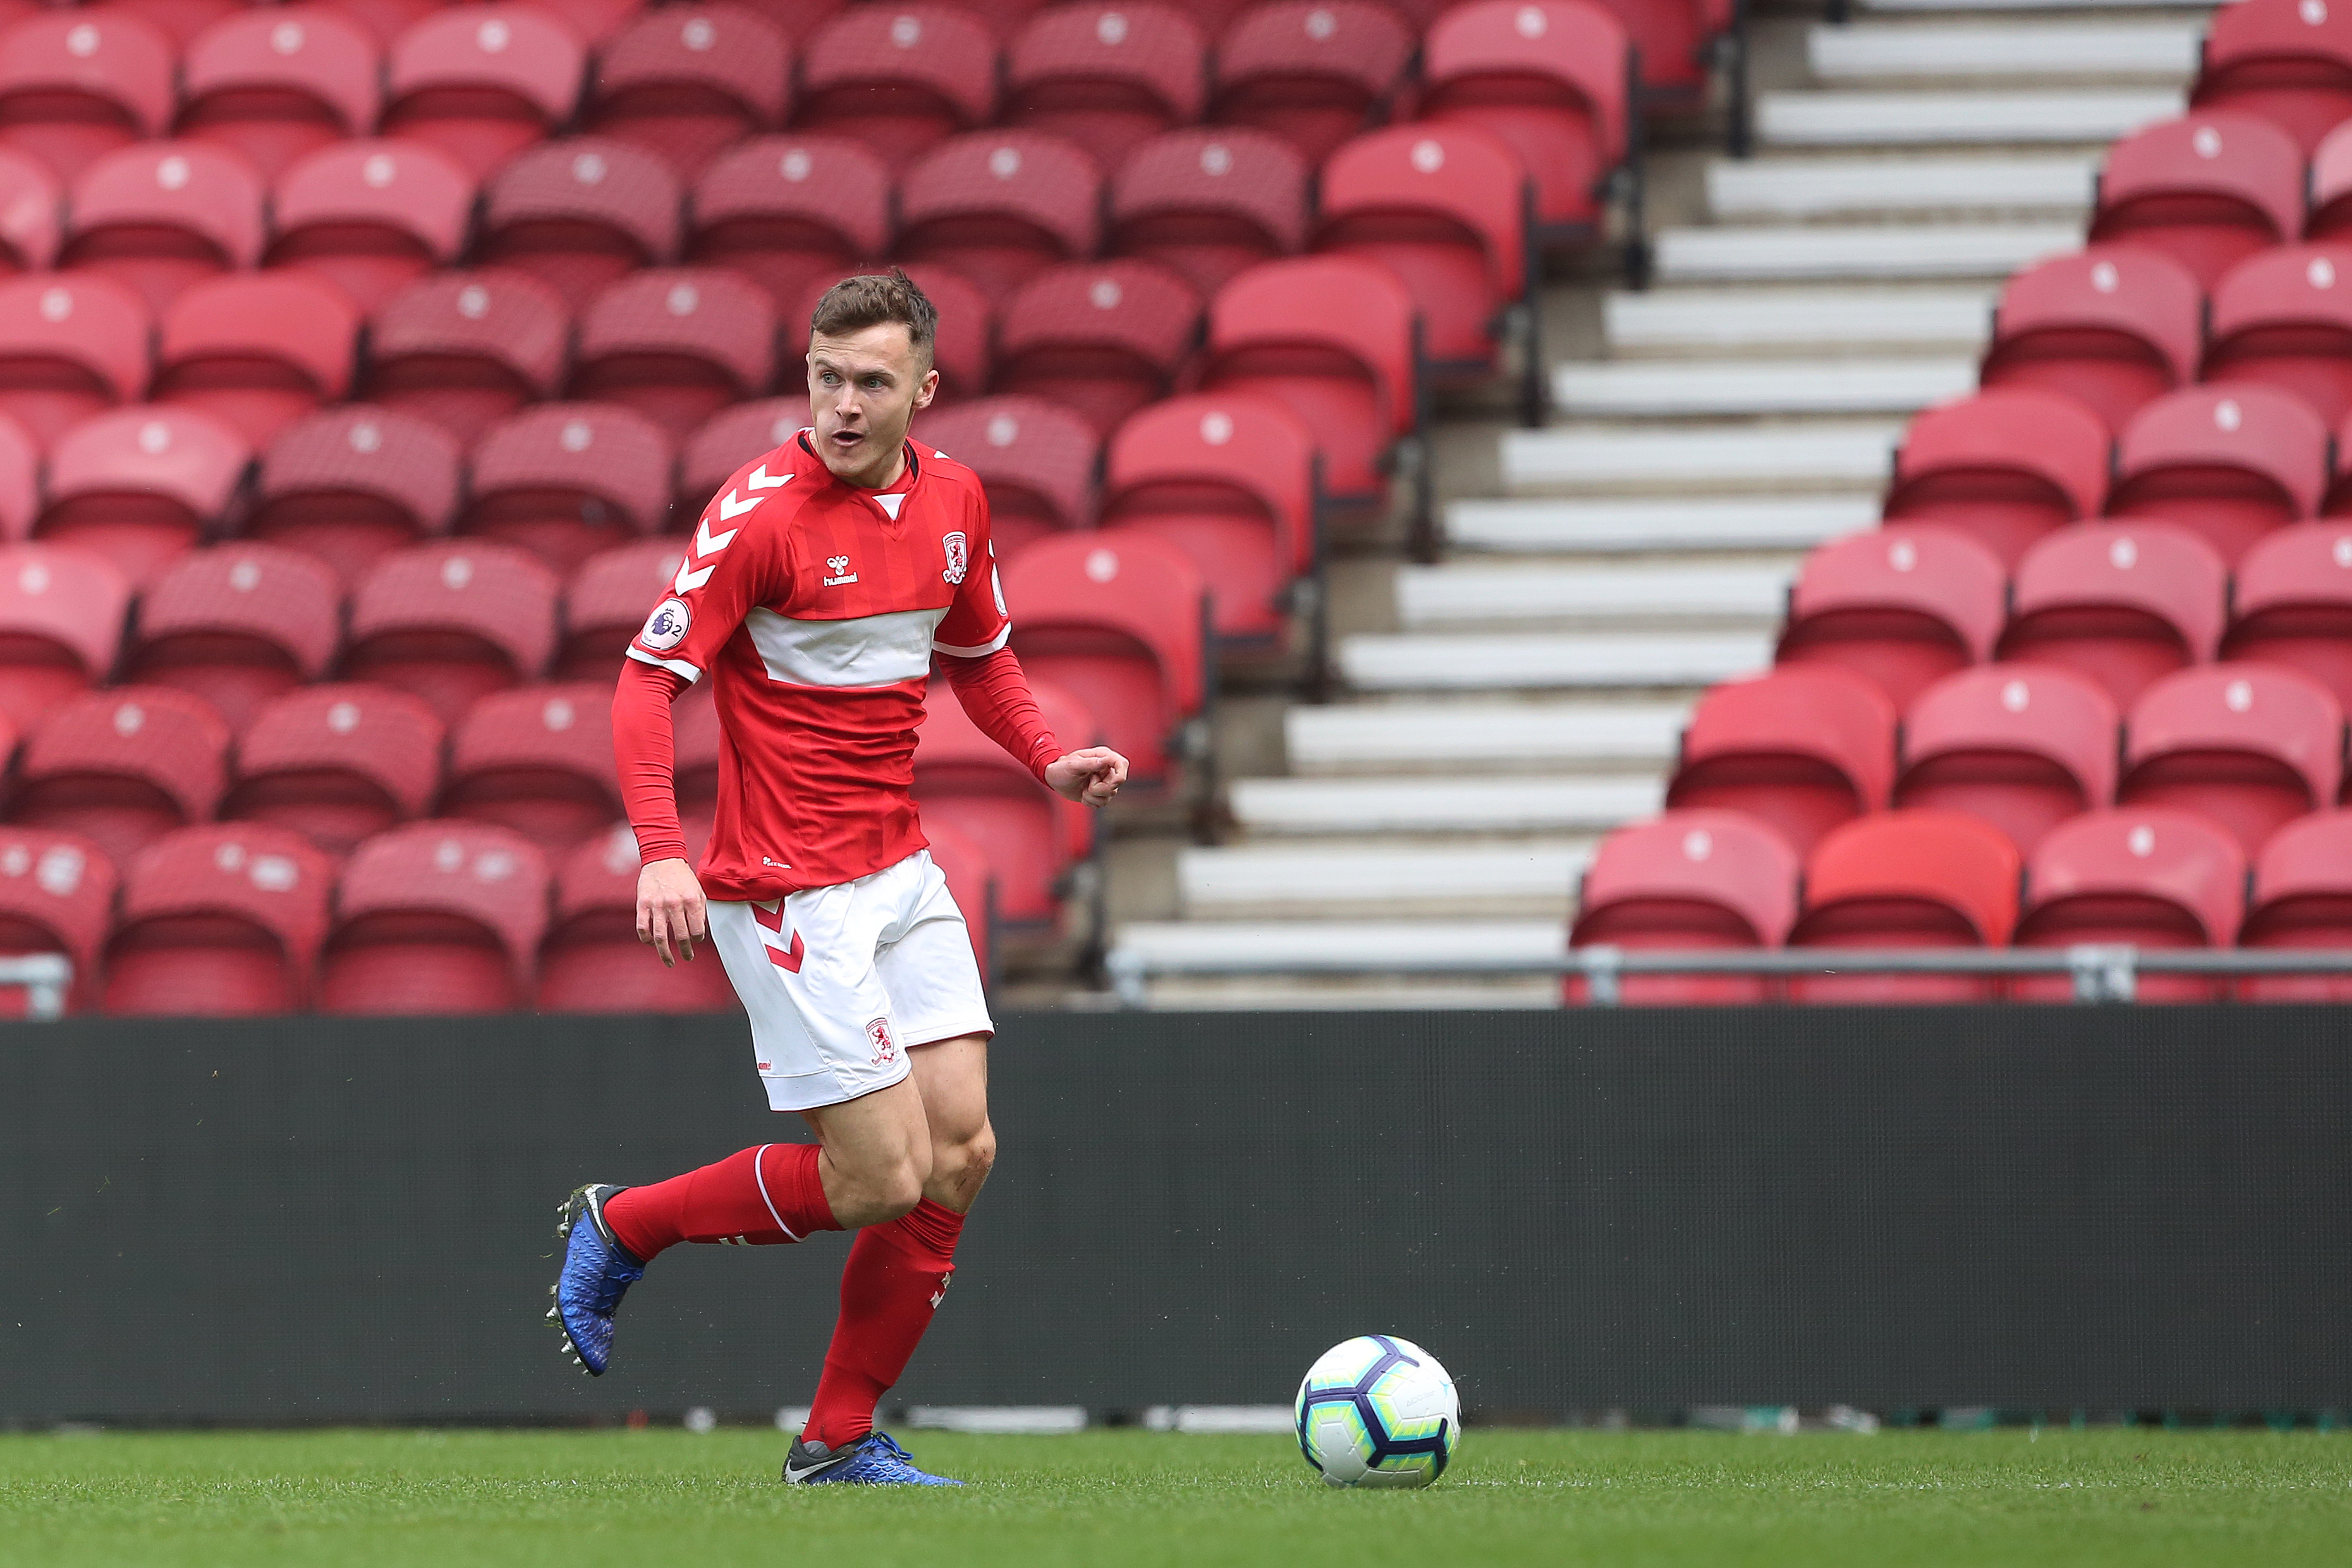 . Mitchell Curry of Middlesbrough during the Premier League 2 Divison 2 match between Middlesbrough and Sunderland at the Riverside Stadium, Middlesbrough on Sunday 7th April 2019. (Credit: Mark Fletcher | MI News) (Photo by MI News/NurPhoto via Getty Images)